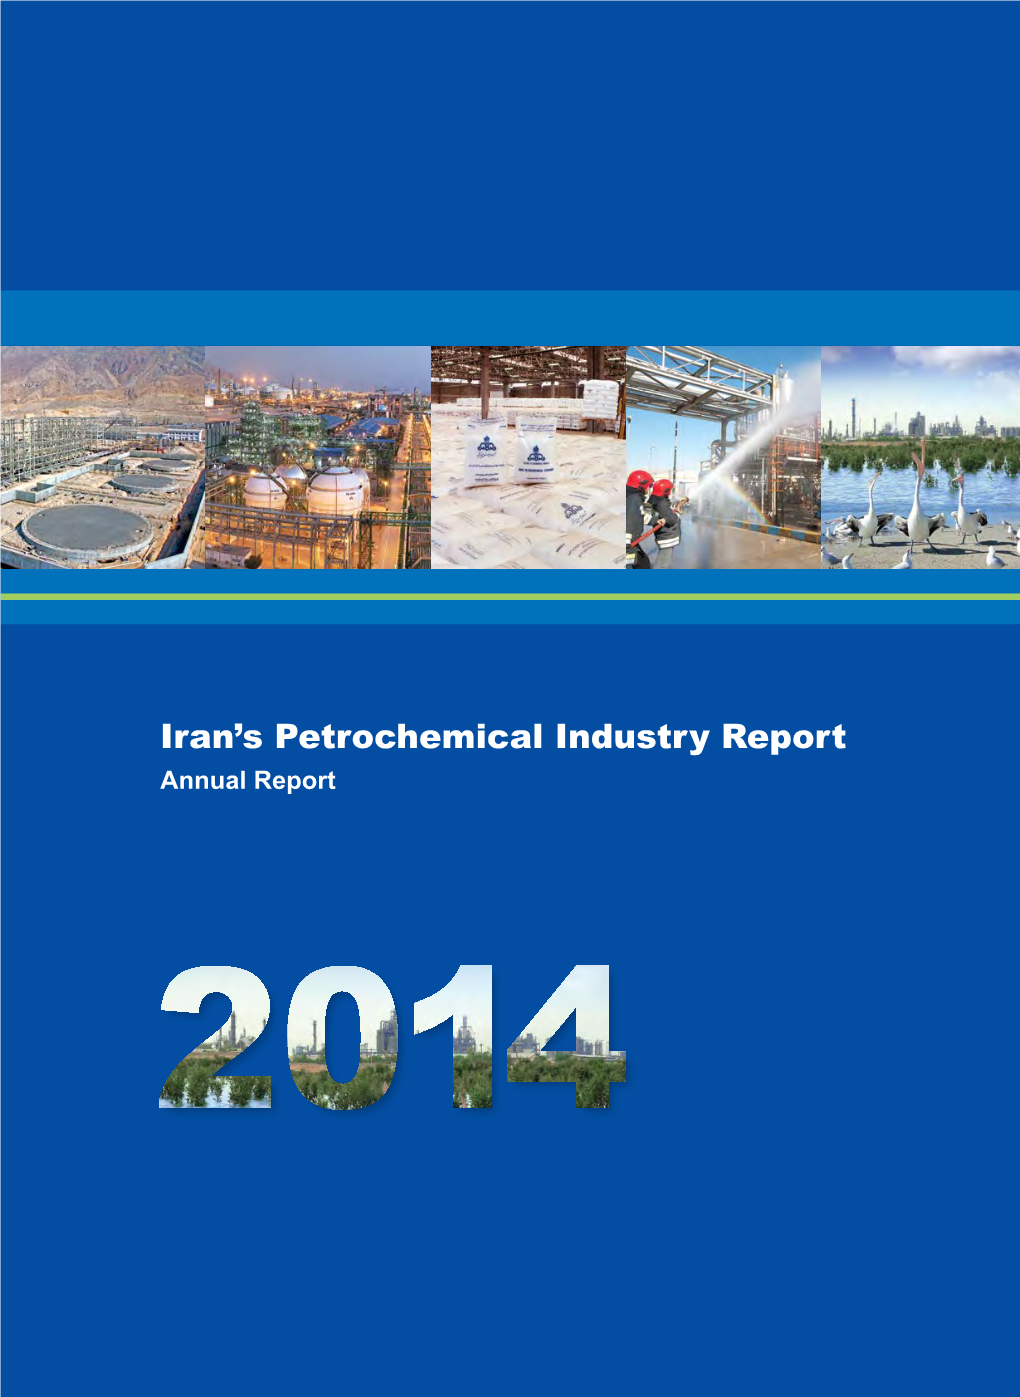 Iran's Petrochemical Industry Report